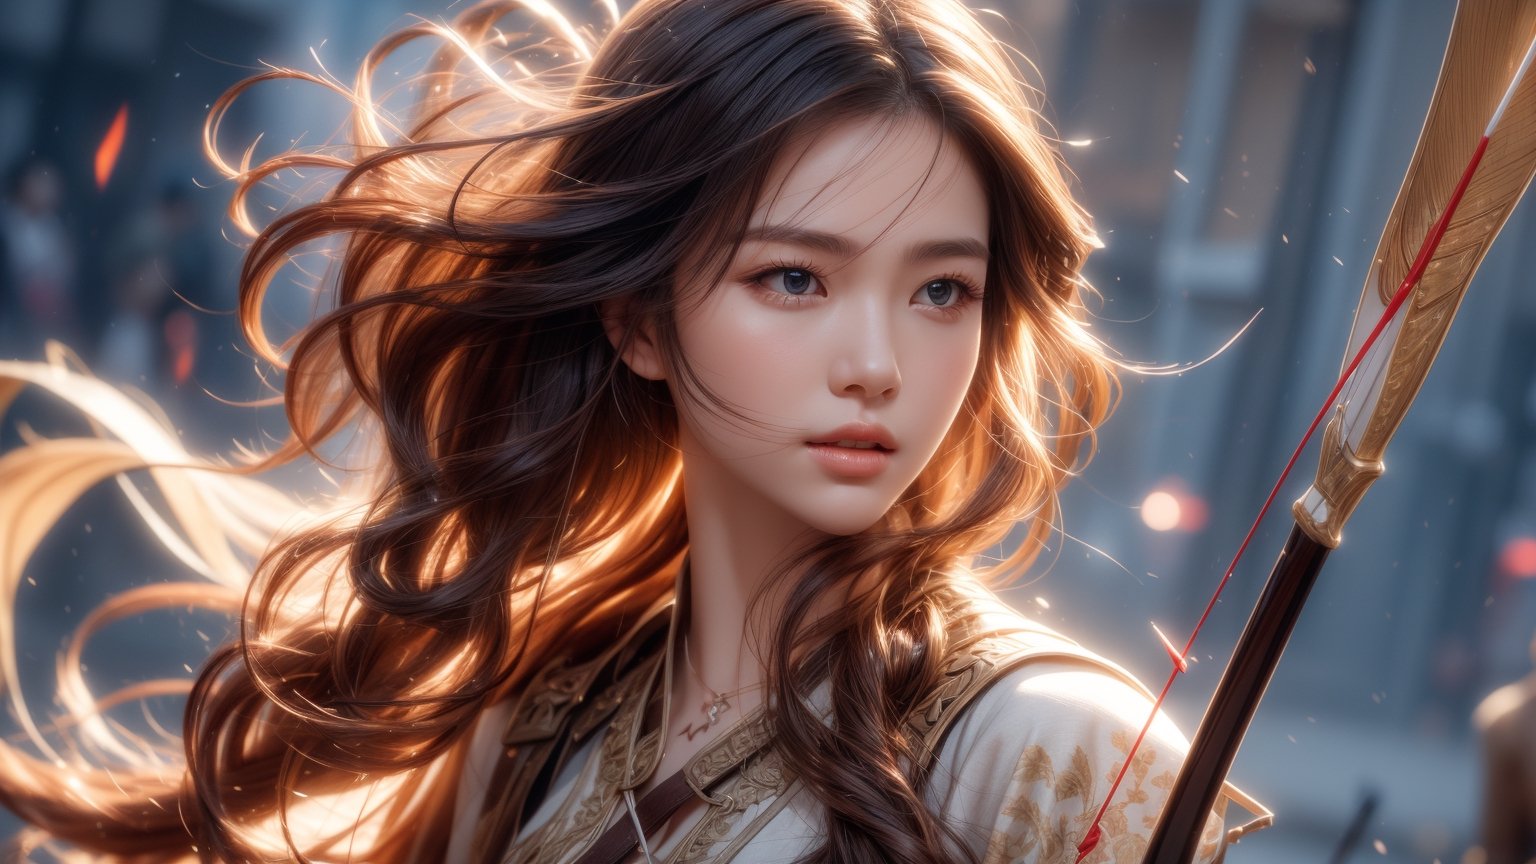 background is ancient war,an archer,1 girl,beautiful korean girl, holding a battle bow, arrow,ready to shoot, hair_past_waist(curly hair, dark hair),
Best Quality, photorealistic, ultra-detailed, finely detailed, high resolution, perfect dynamic composition, sharp-focus, 